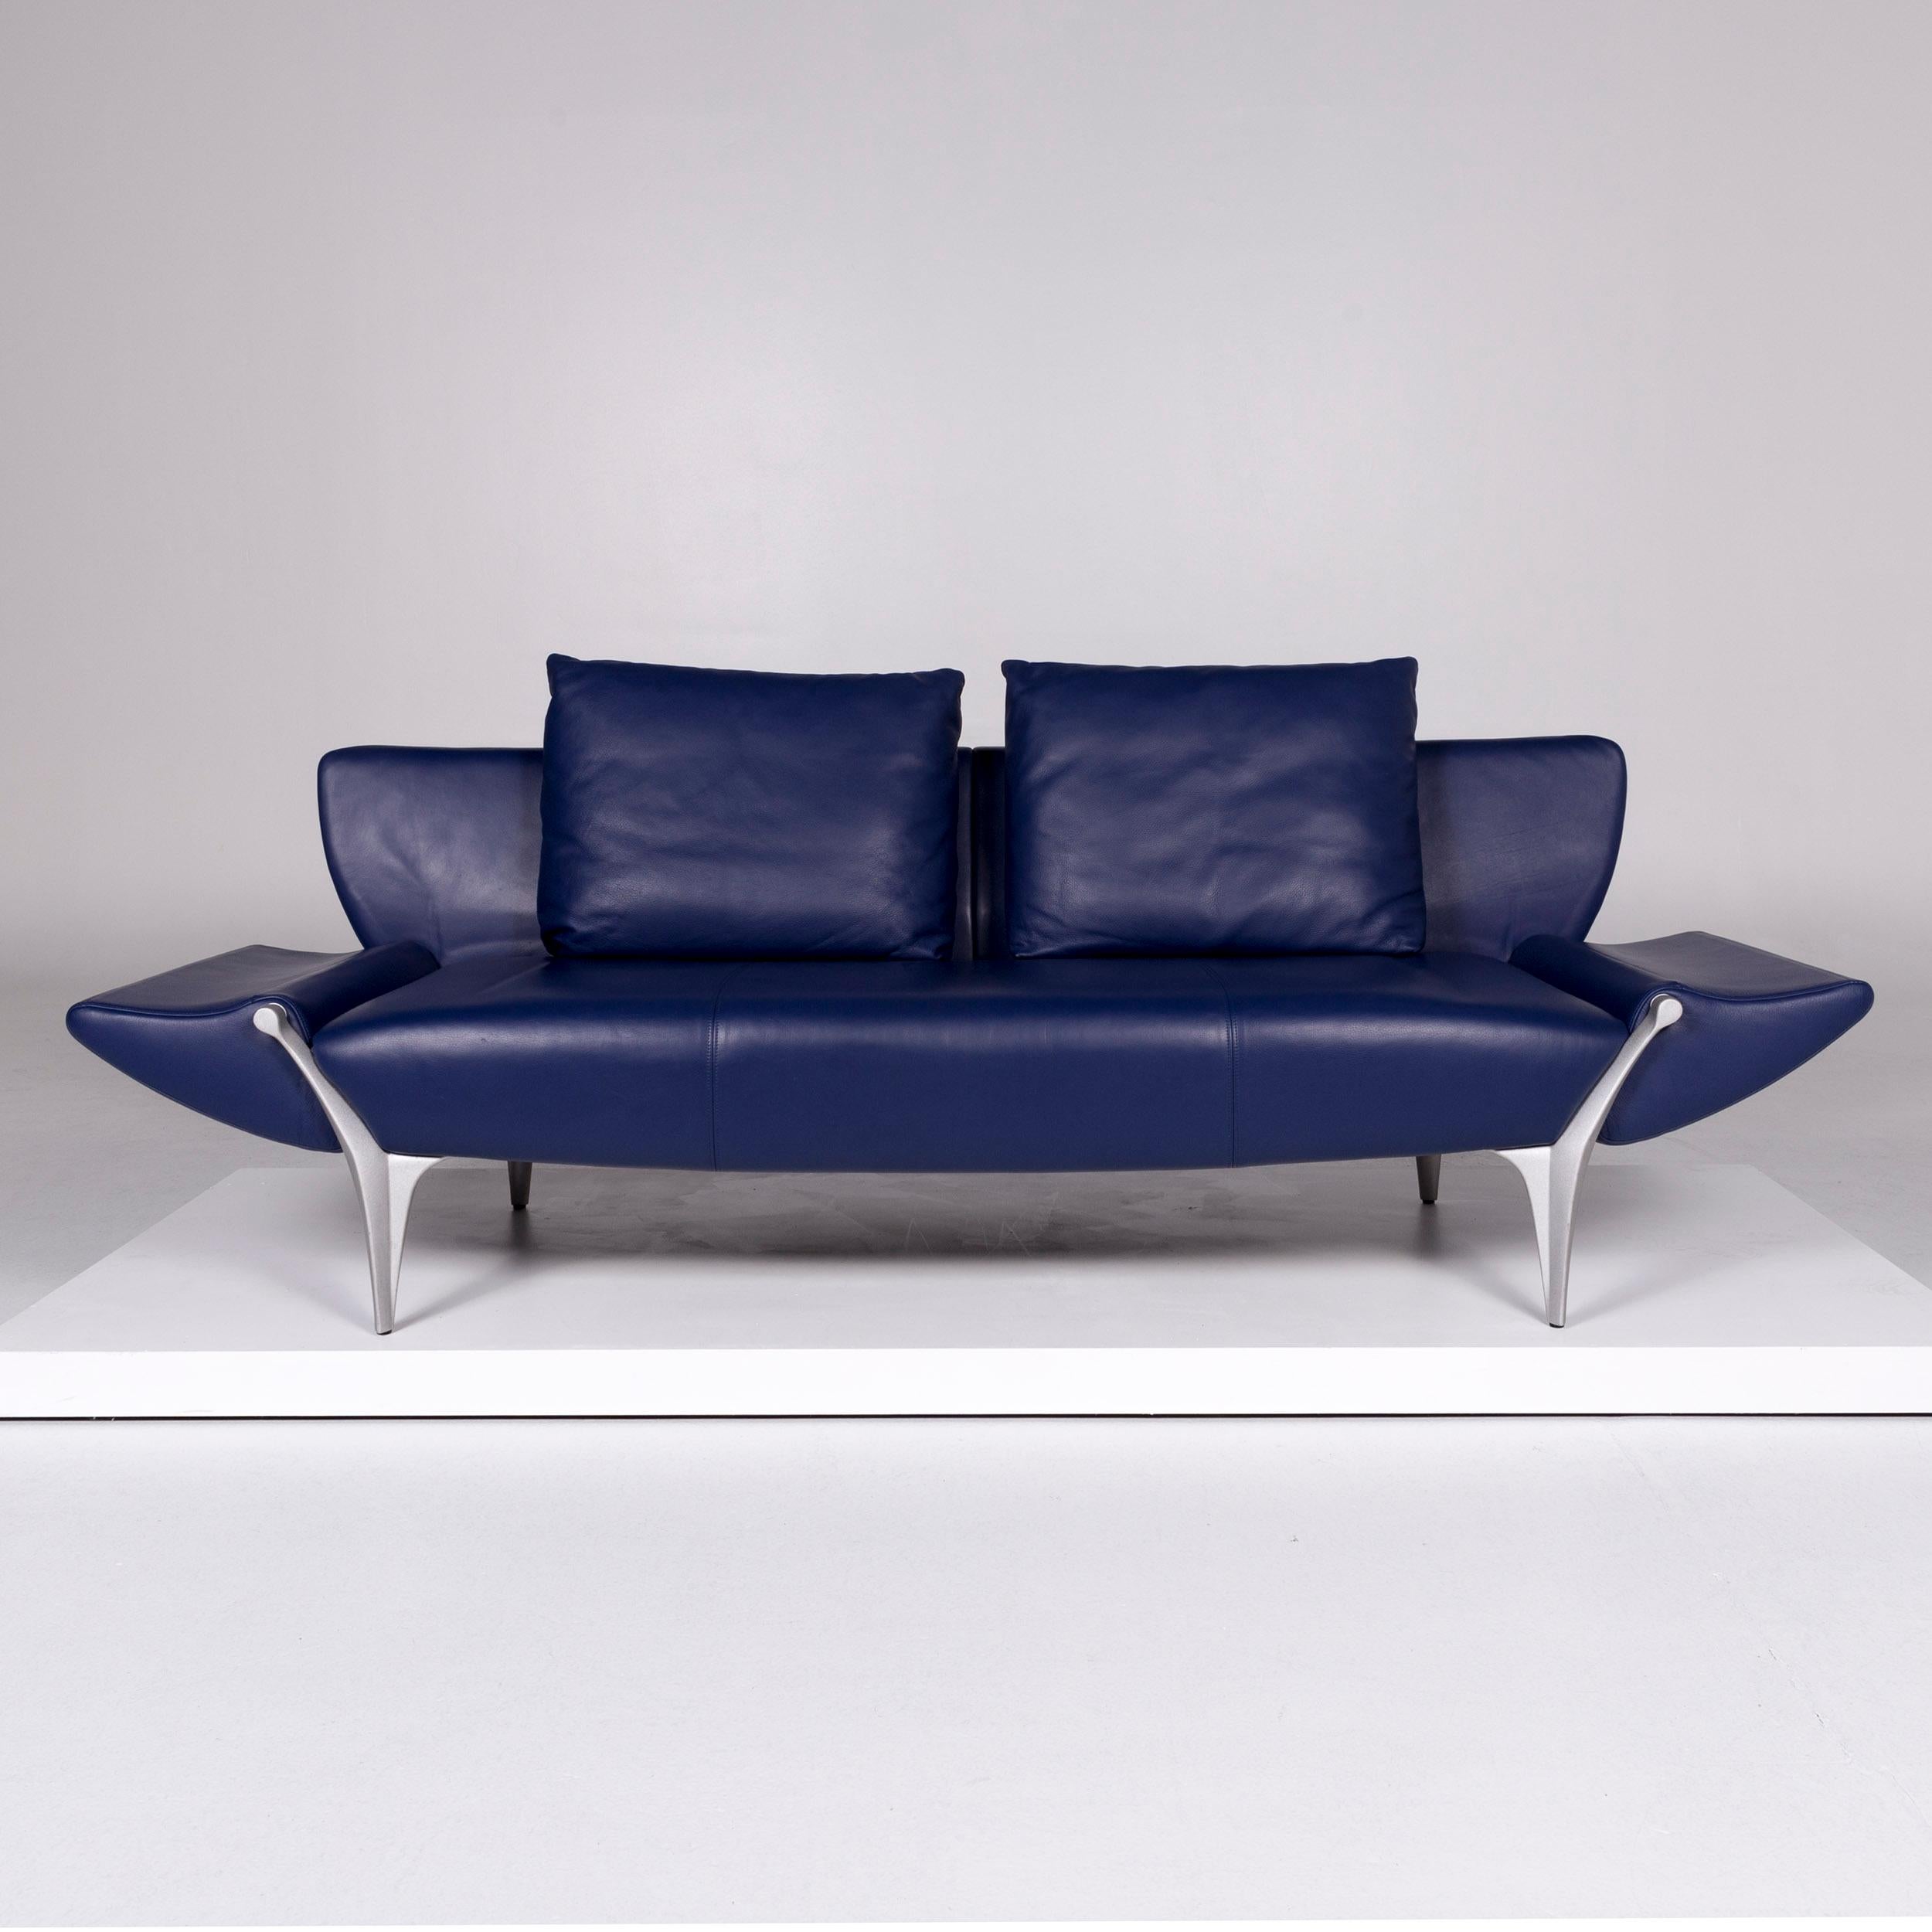 We bring to you a Rolf Benz 1600 Leder sofa Blau Zweisitzer couch

Product measurements in centimetres:
 
Depth 97
Width 199
Height 76
Seat-height 41
Rest-height 42
Seat-depth 46
Seat-width 160
Back-height 36.
 